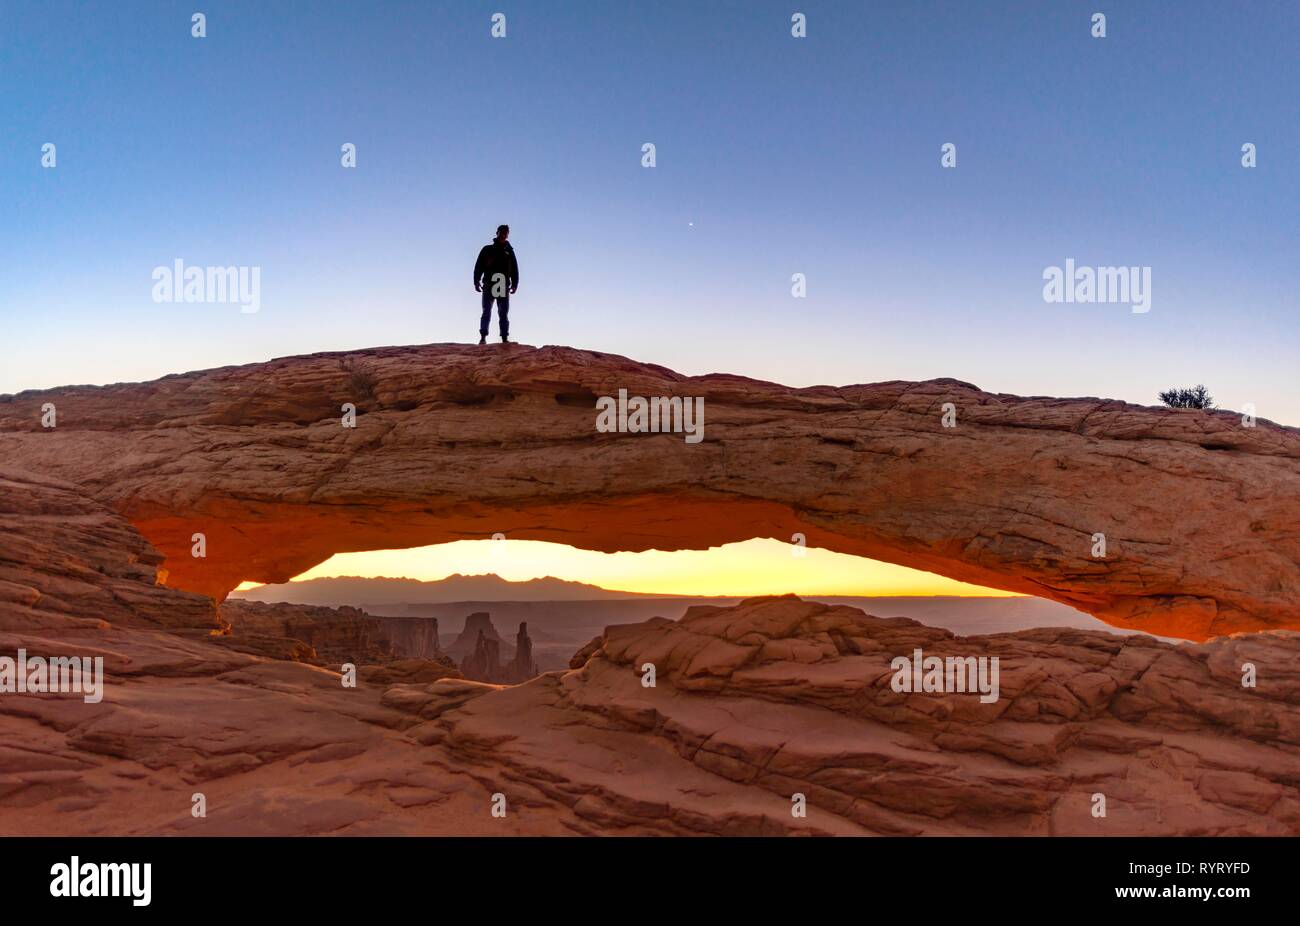 Junger Mann steht auf Rock Arch, Mesa Arch, Sunrise, Grand View Point Road, Insel im Himmel, Canyonlands National Park, Moab Stockfoto